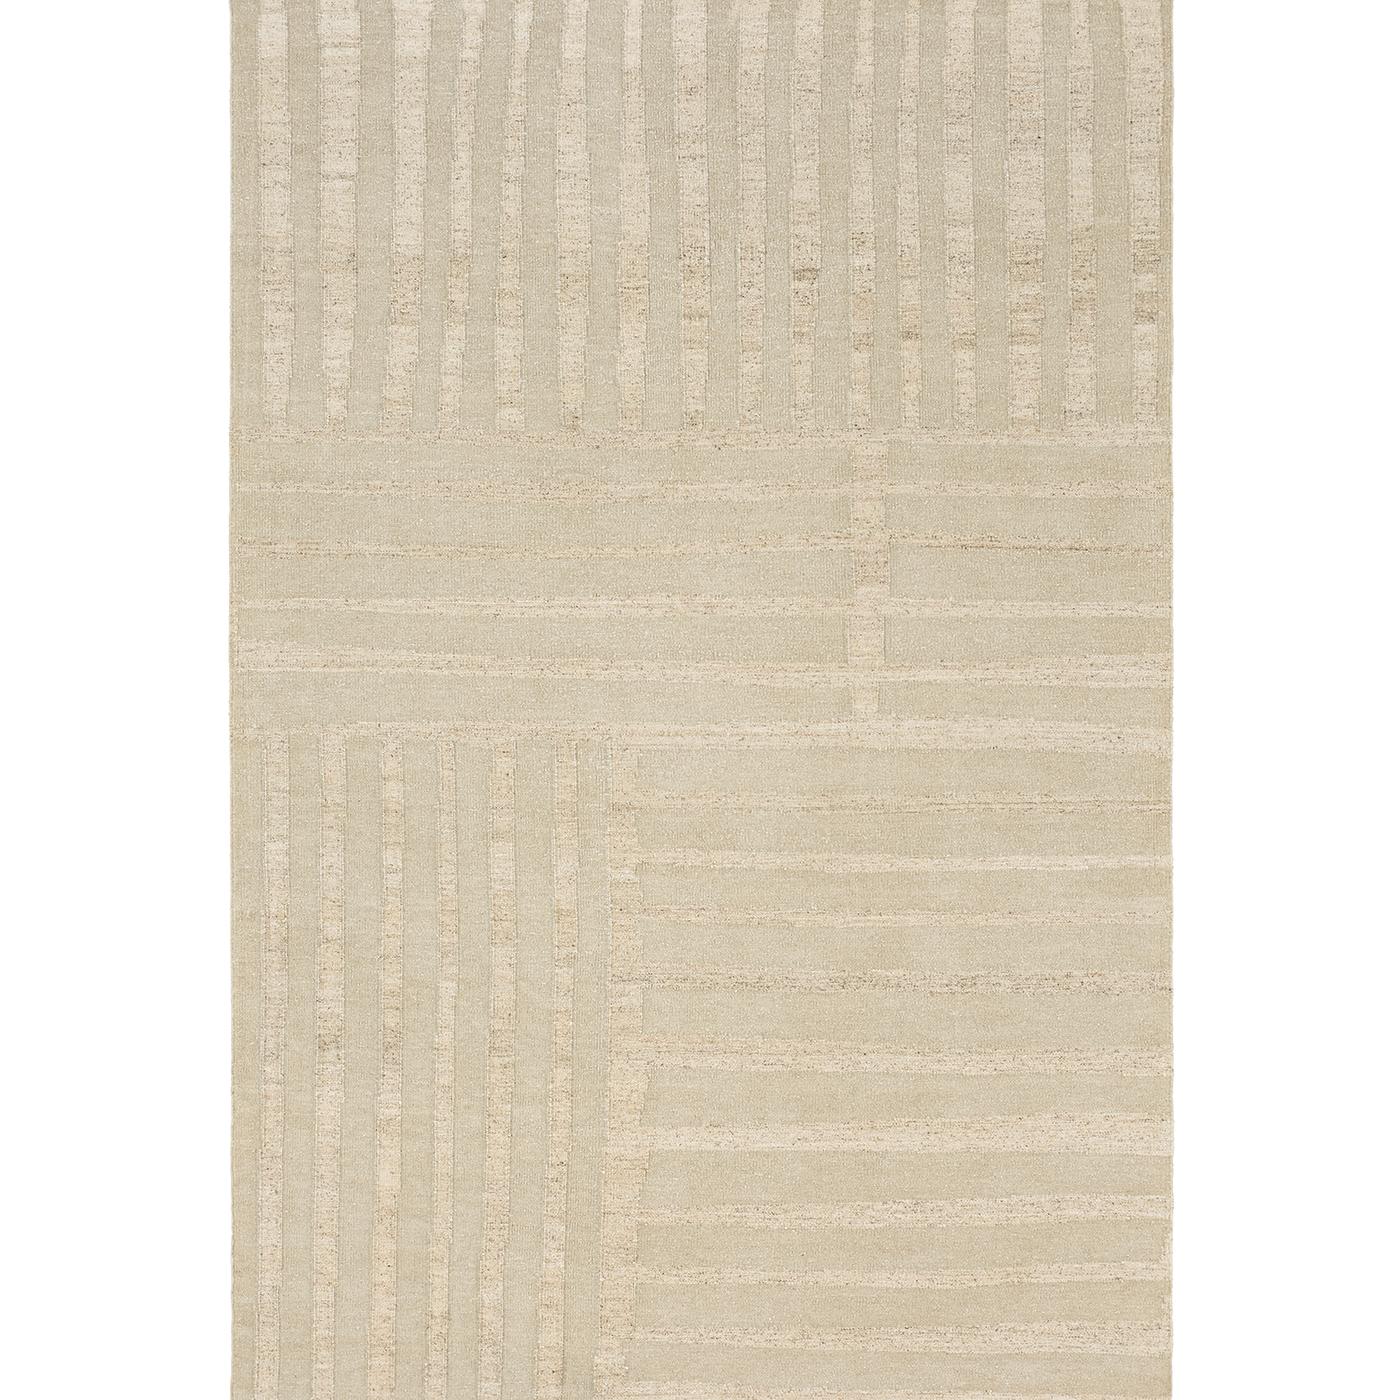 Hand-Woven Linen Nettle Stripe Natural Undyed Flatweave Rug by Knots Rugs